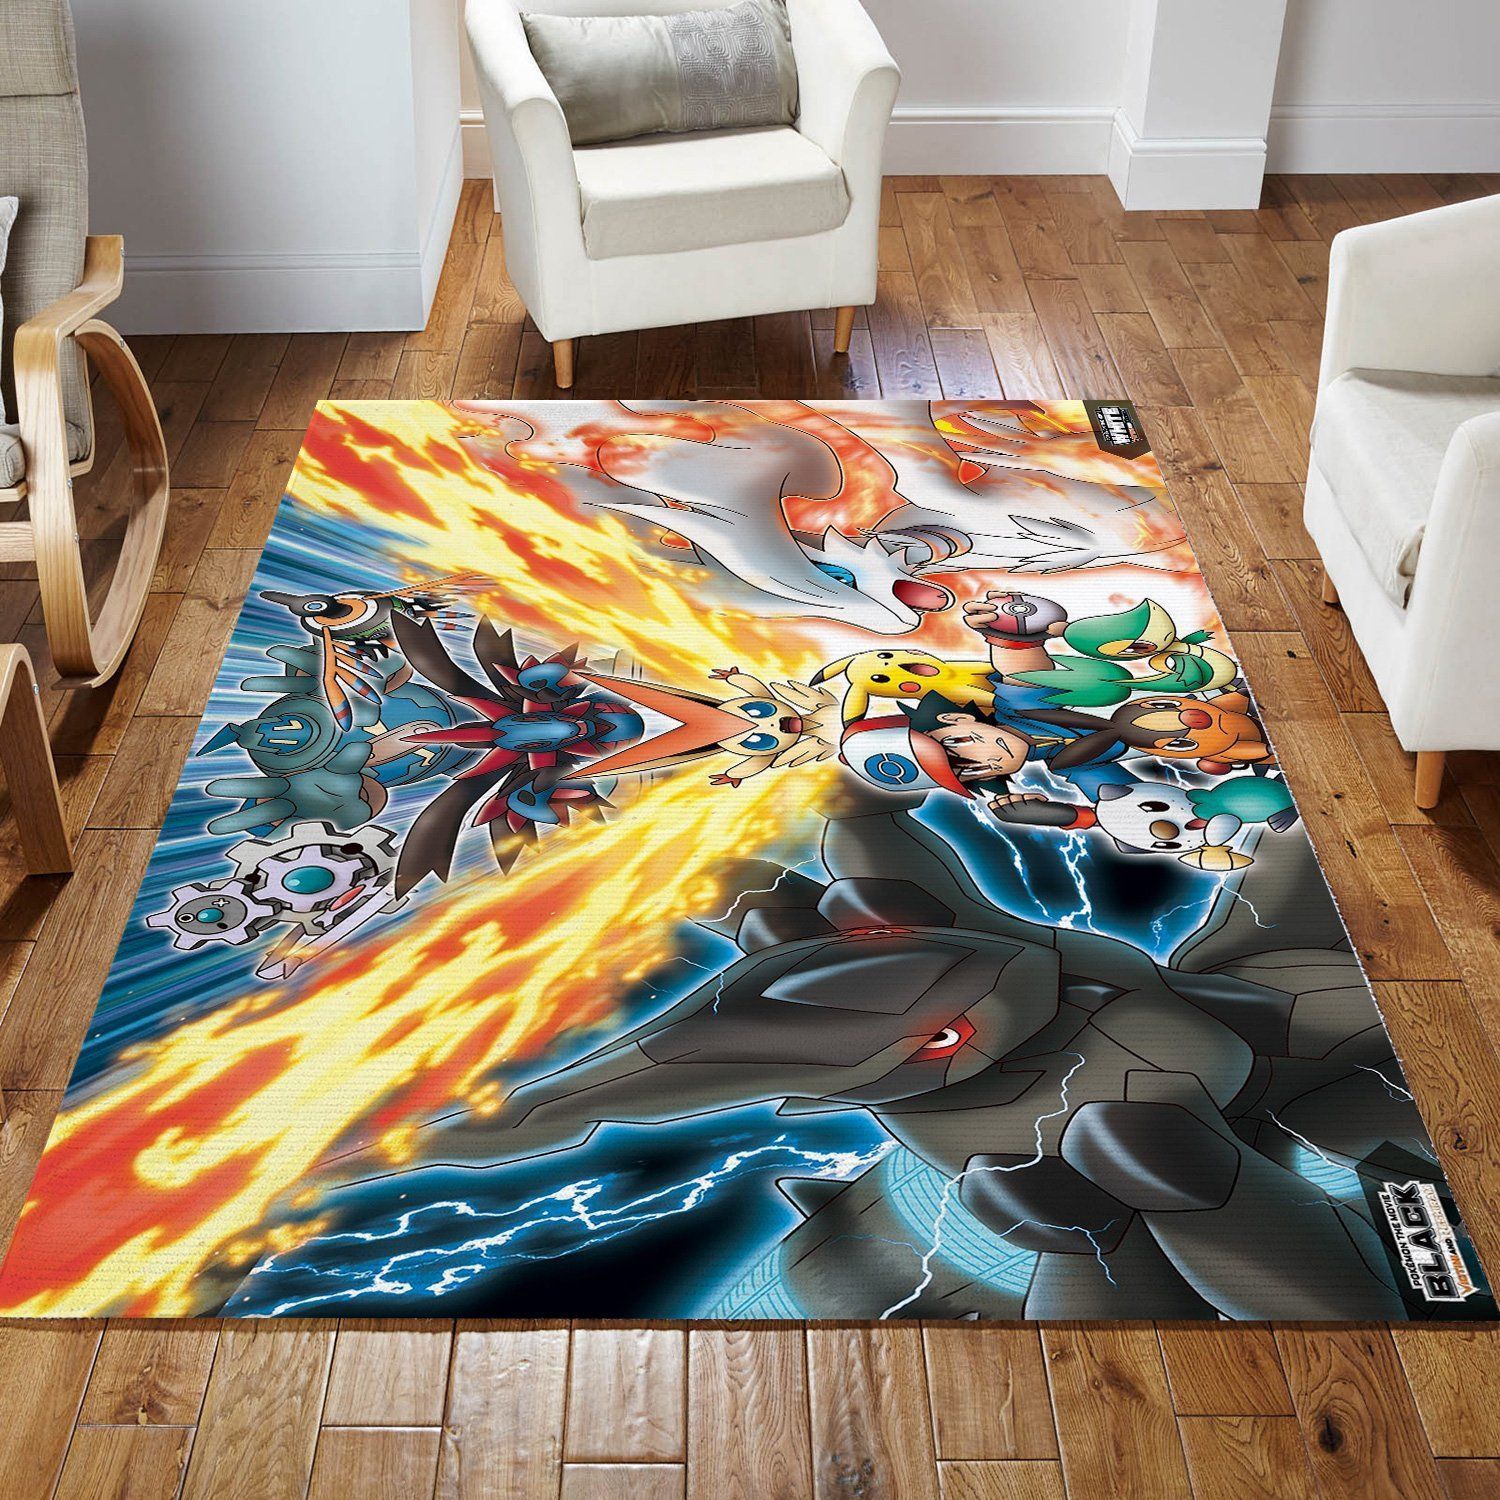 Pokemon Family Anime Movies Area Rugs Living Room Carpet FN031206 Local Brands Floor Decor The US Decor - Indoor Outdoor Rugs 3